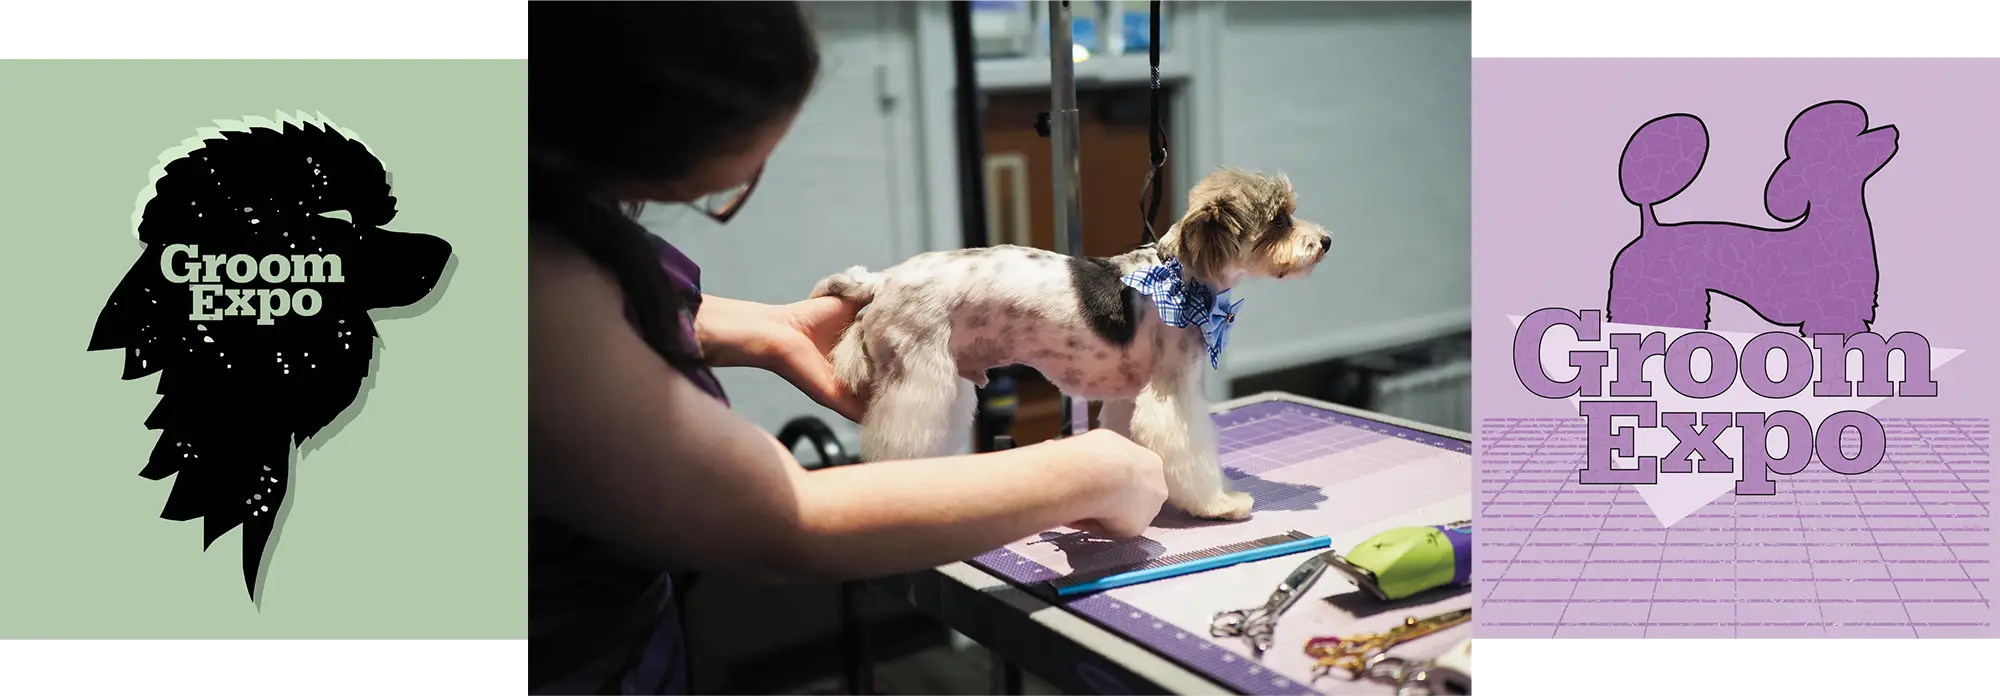 Woman grooming a small dog on a table